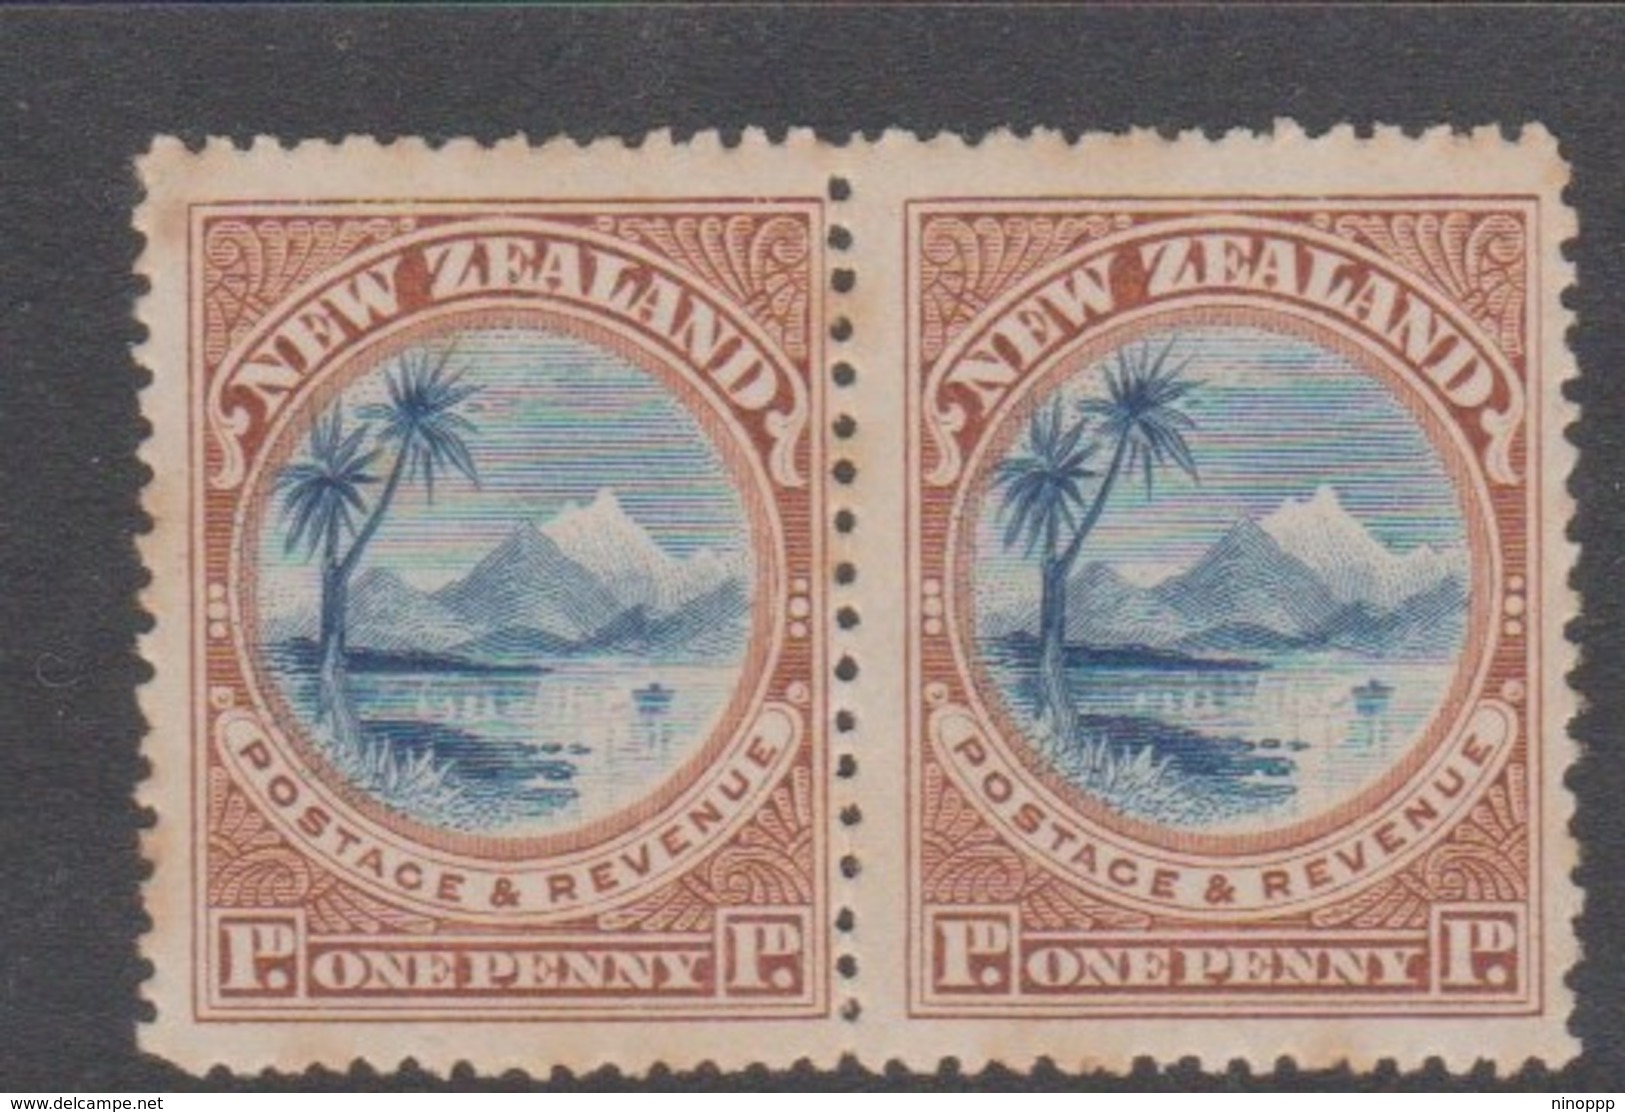 New Zealand SG 247 1898 One Penny Lake Taupo,pair Mint Never Hinged,mint Never Hinged - Neufs